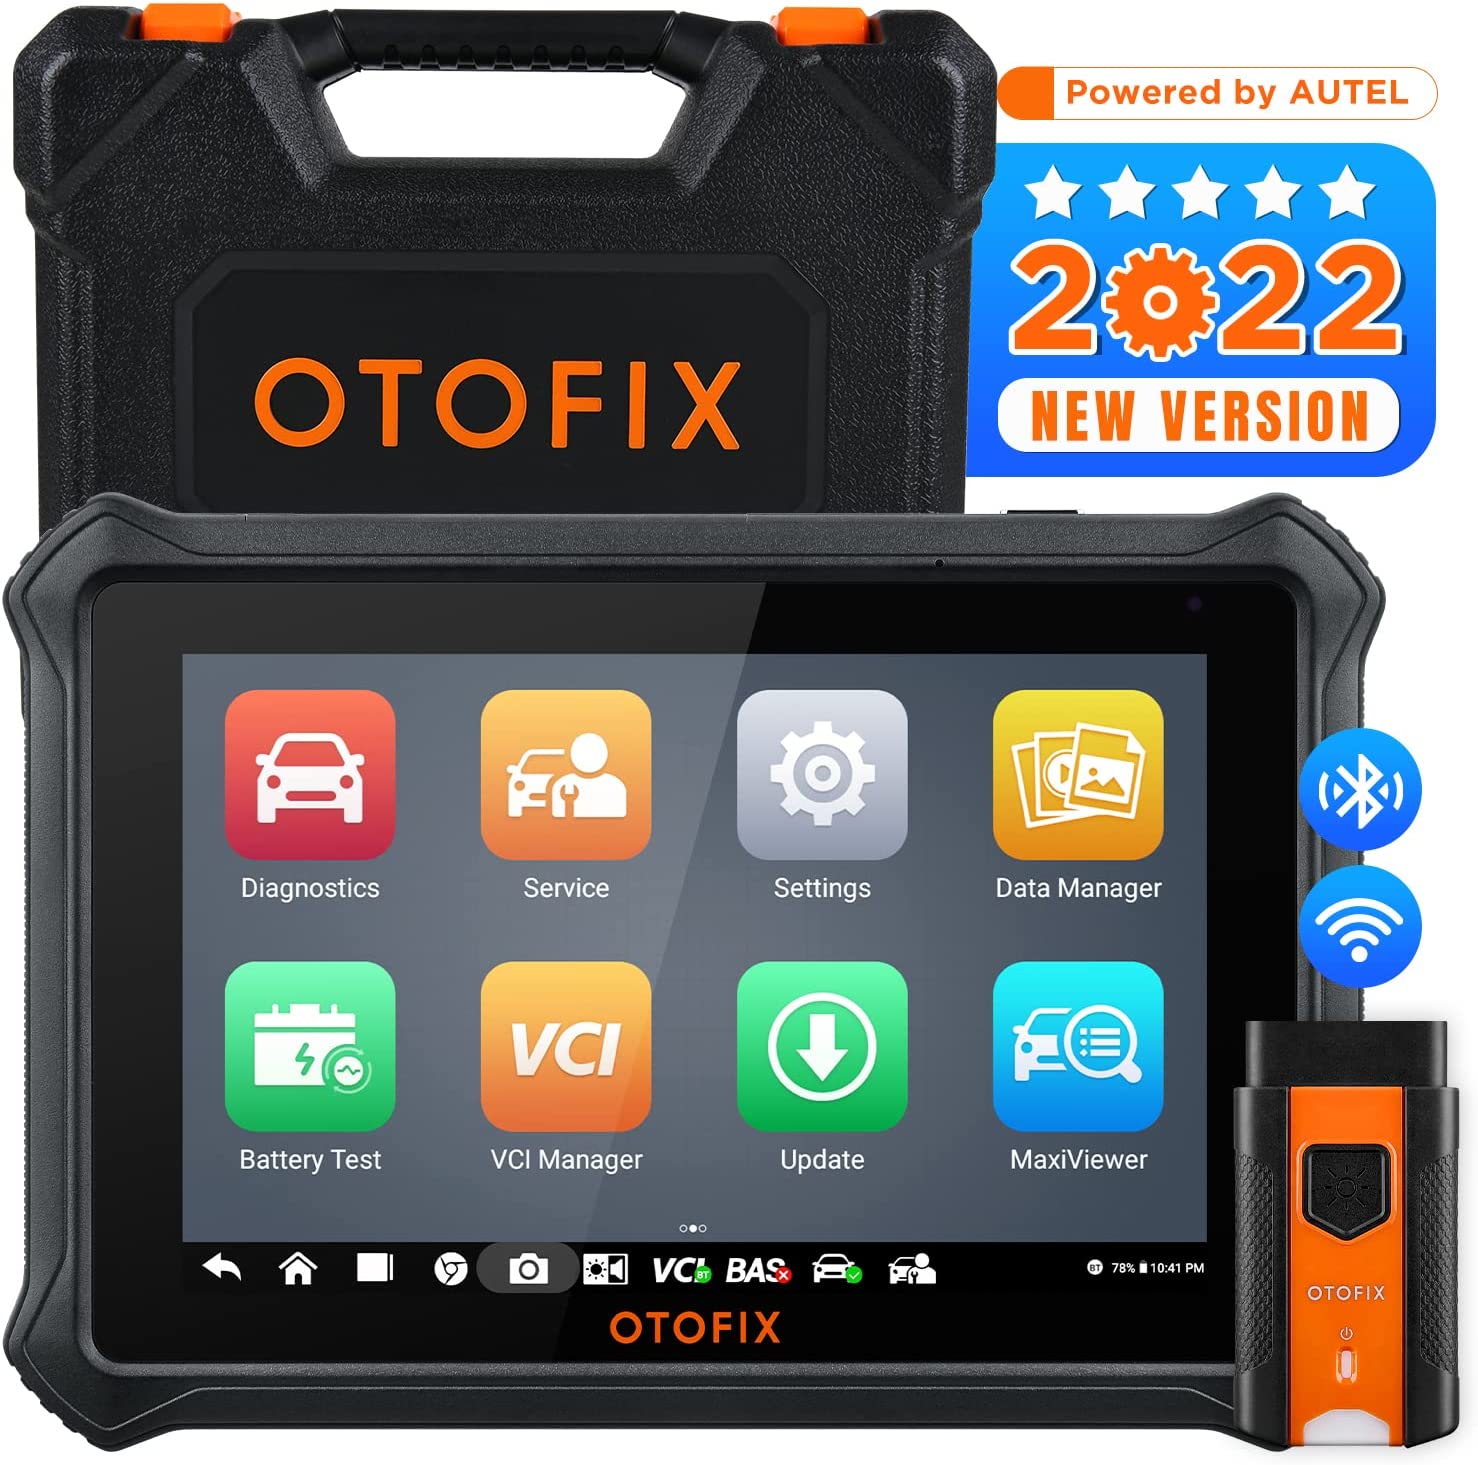 OTOFIX D1 Lite Car Diagnostic Scan Tool, 2022 New Model Automotive Scanner, 13+ Language, 26+ Reset Service, Data Logging, All System Diagnostic, Work with BT1 Lite Battery Tester, FCA SGW AutoAuth